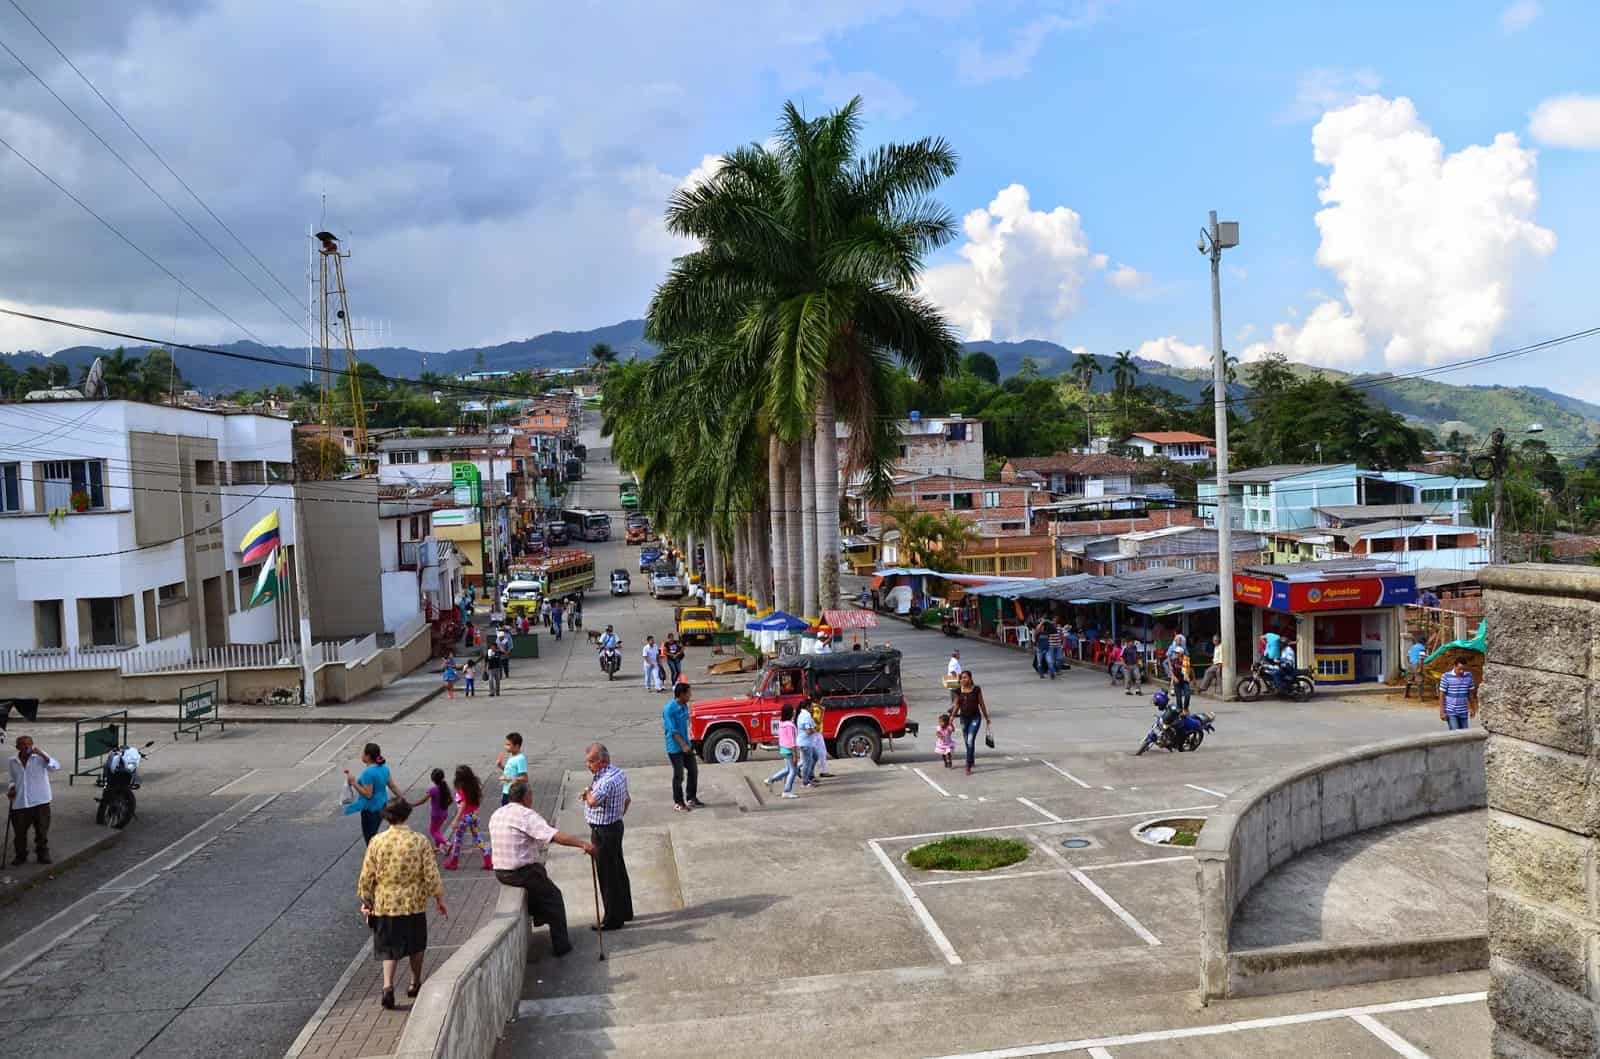 Buses stop on this road in Quinchía, Risaralda, Colombia